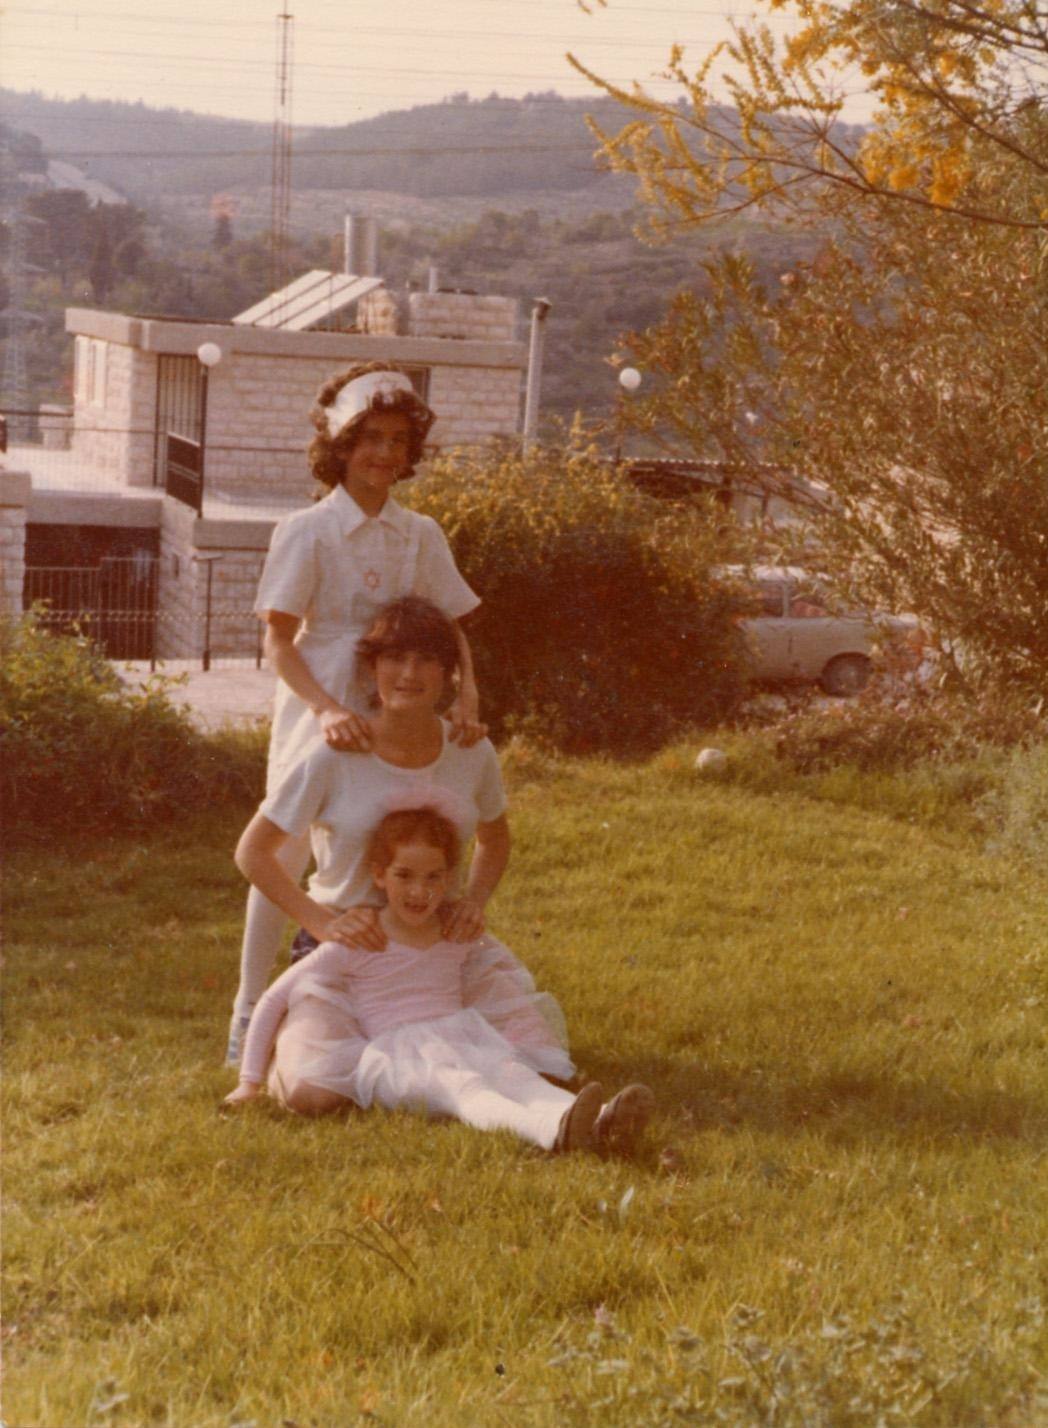 Left: MyHeritage’s founder and CEO, Gilad Japhet, wearing a wig and dressed as a nurse for the Purim holiday, together with his sisters in Jerusalem, 1978. Right: after color restoration, the photo looks as if it were taken yesterday.